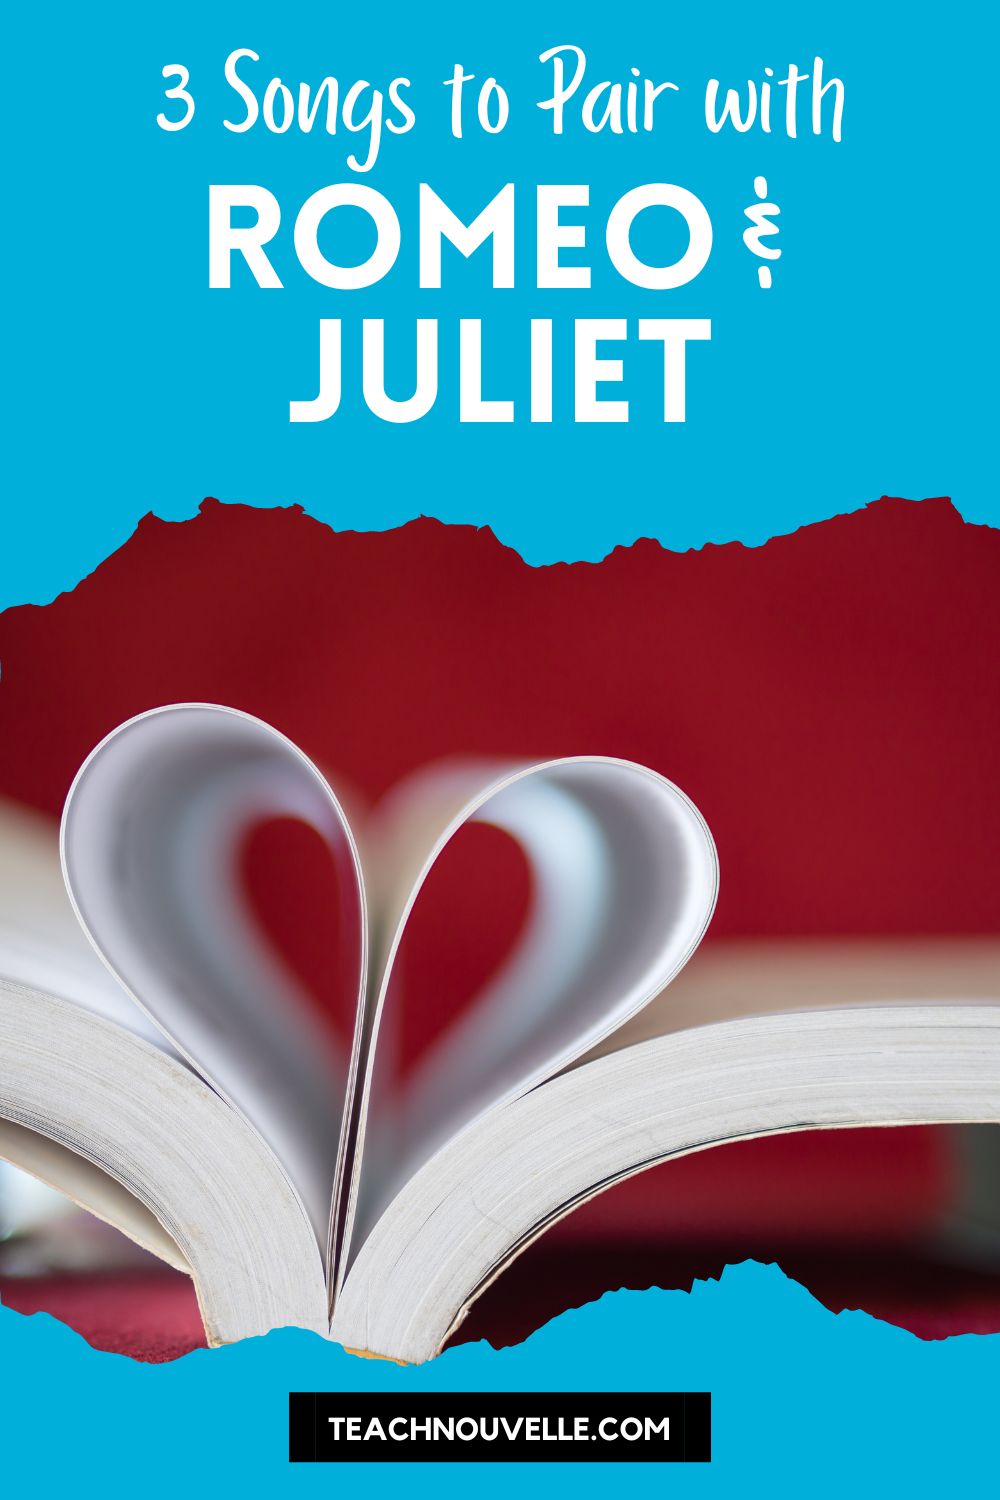 3 songs to pair with Romeo and Juliet activity with two folded pages shaped into a heart with a red and blue background